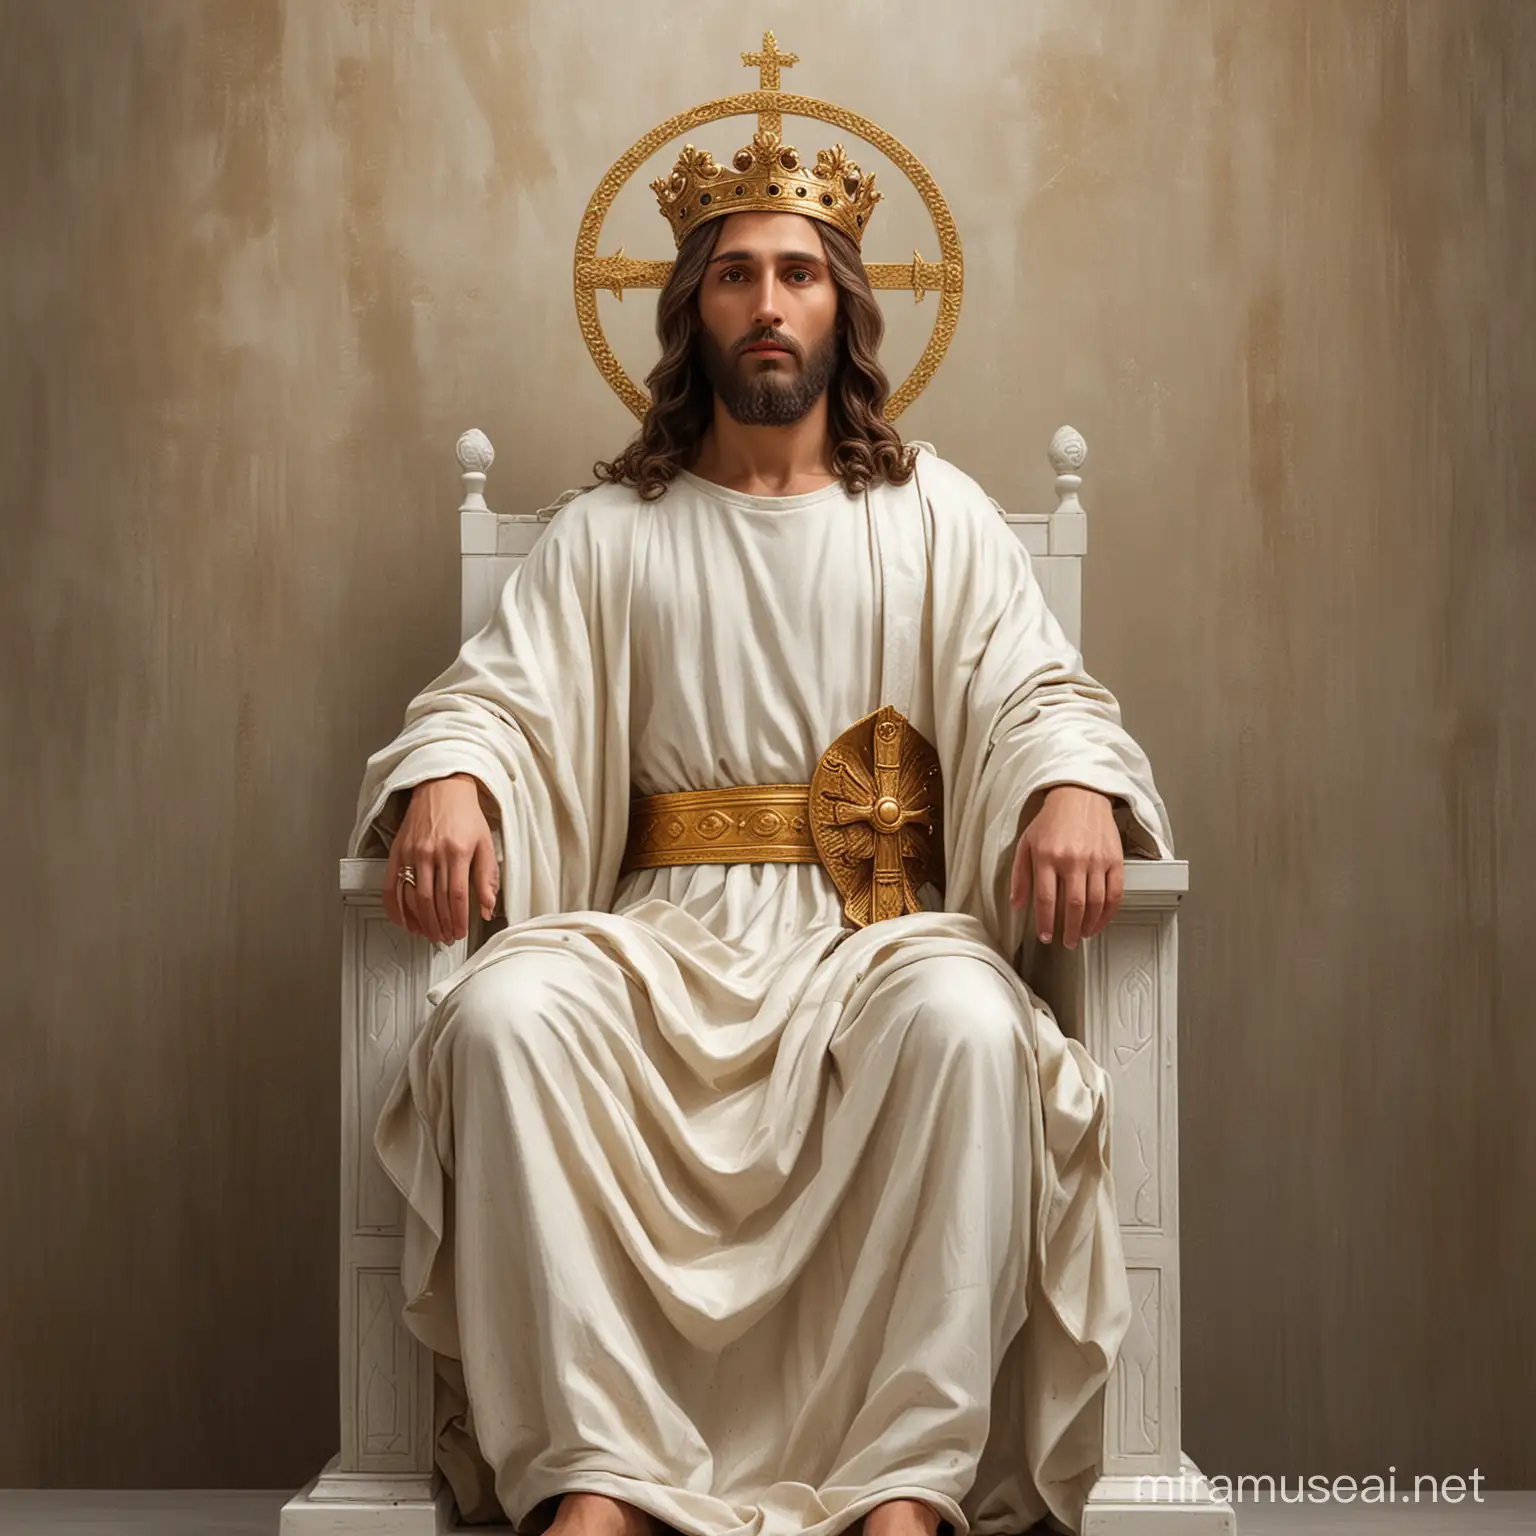 Divine Christ Enthroned with Regal Crown